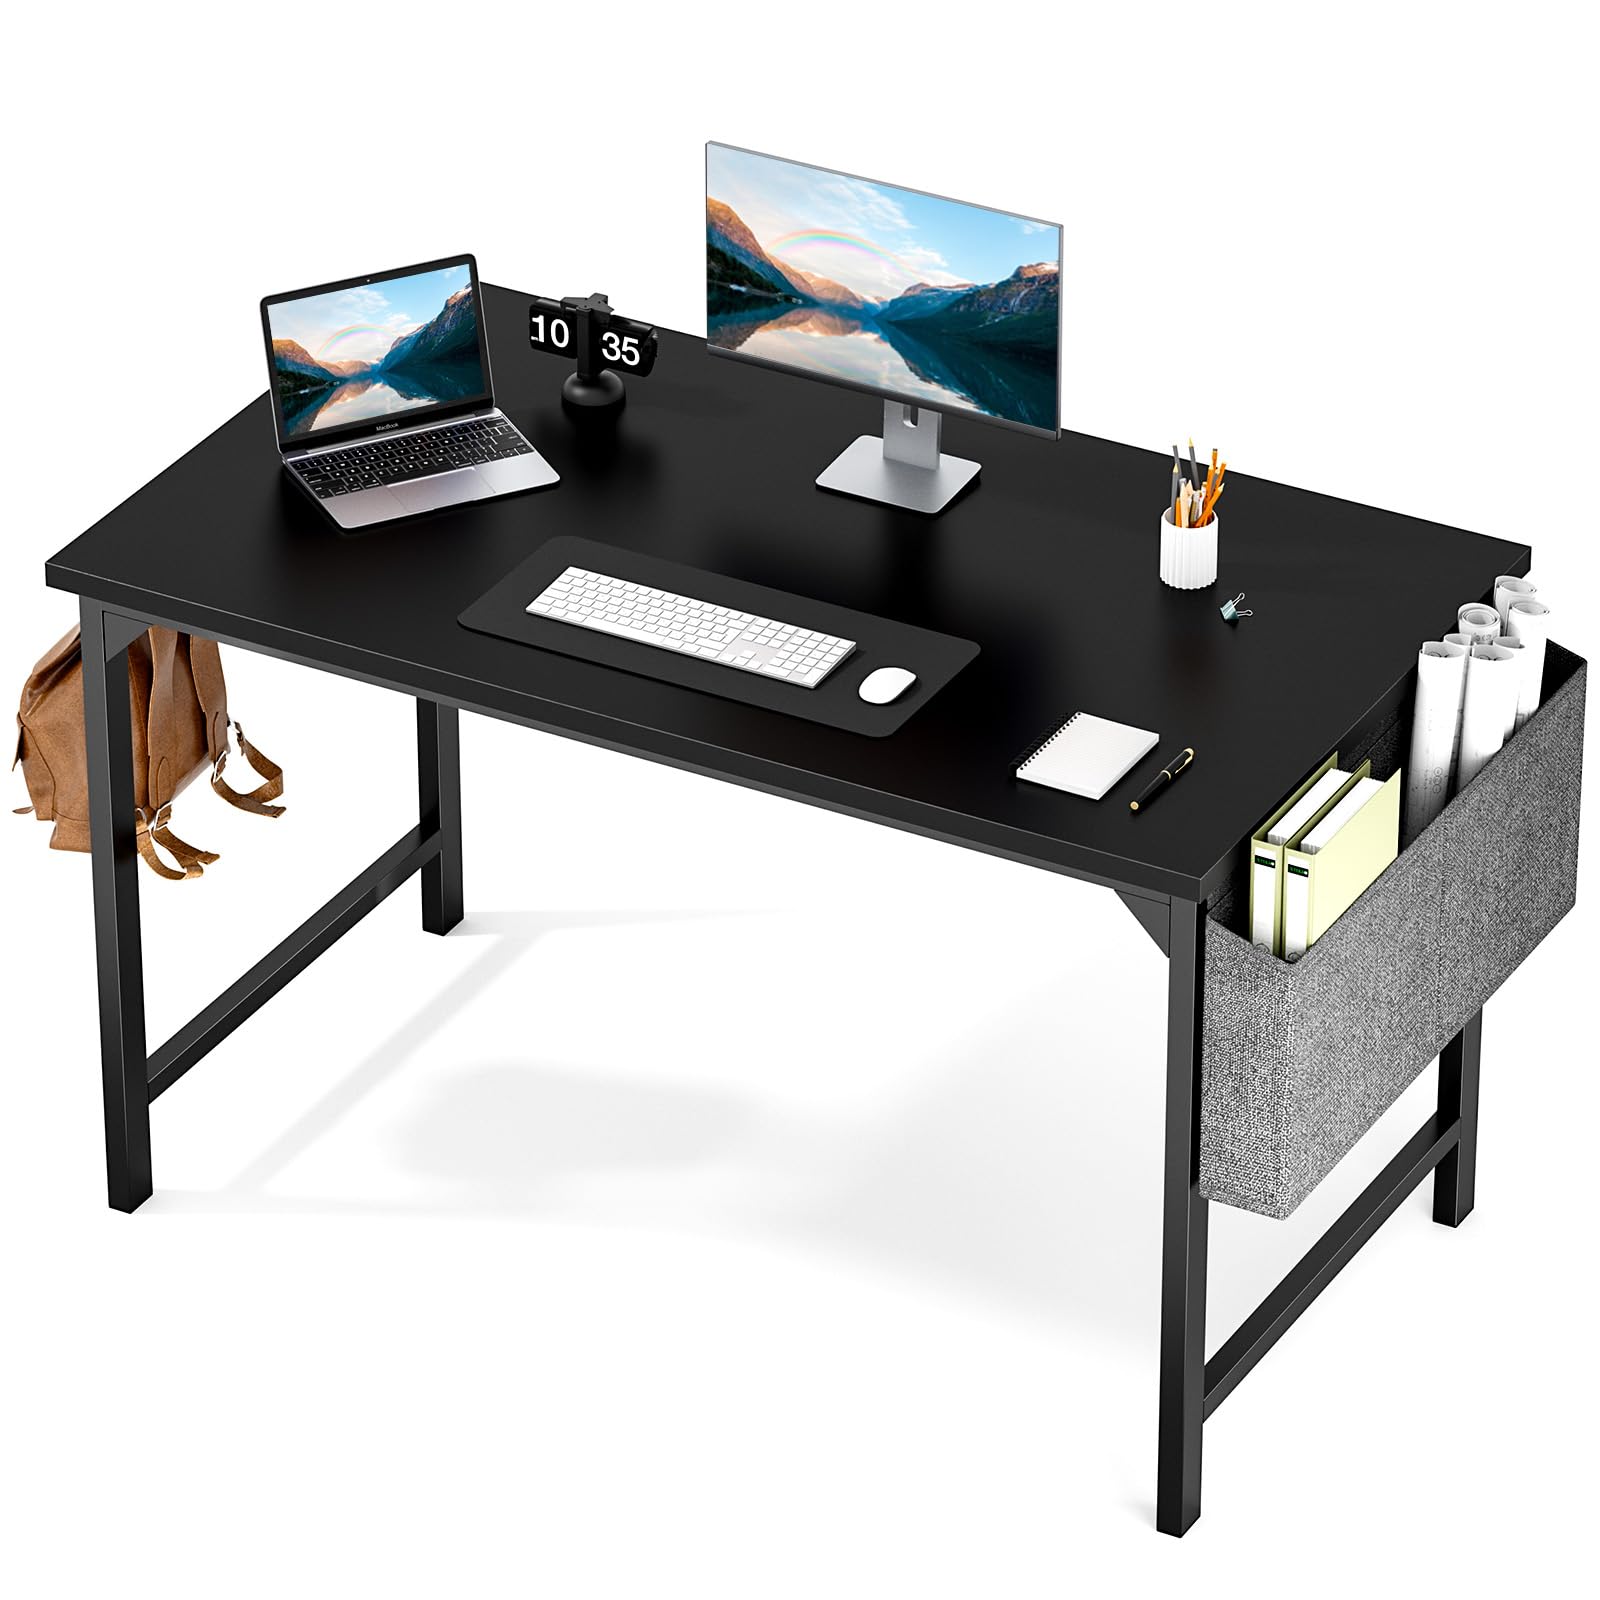 Sweetcrispy Computer Office Desk 48 Inch Kids Student Study Writing Work with Storage Bag & Headphone Hooks Modern Simple Home Bedroom PC Table $39.99